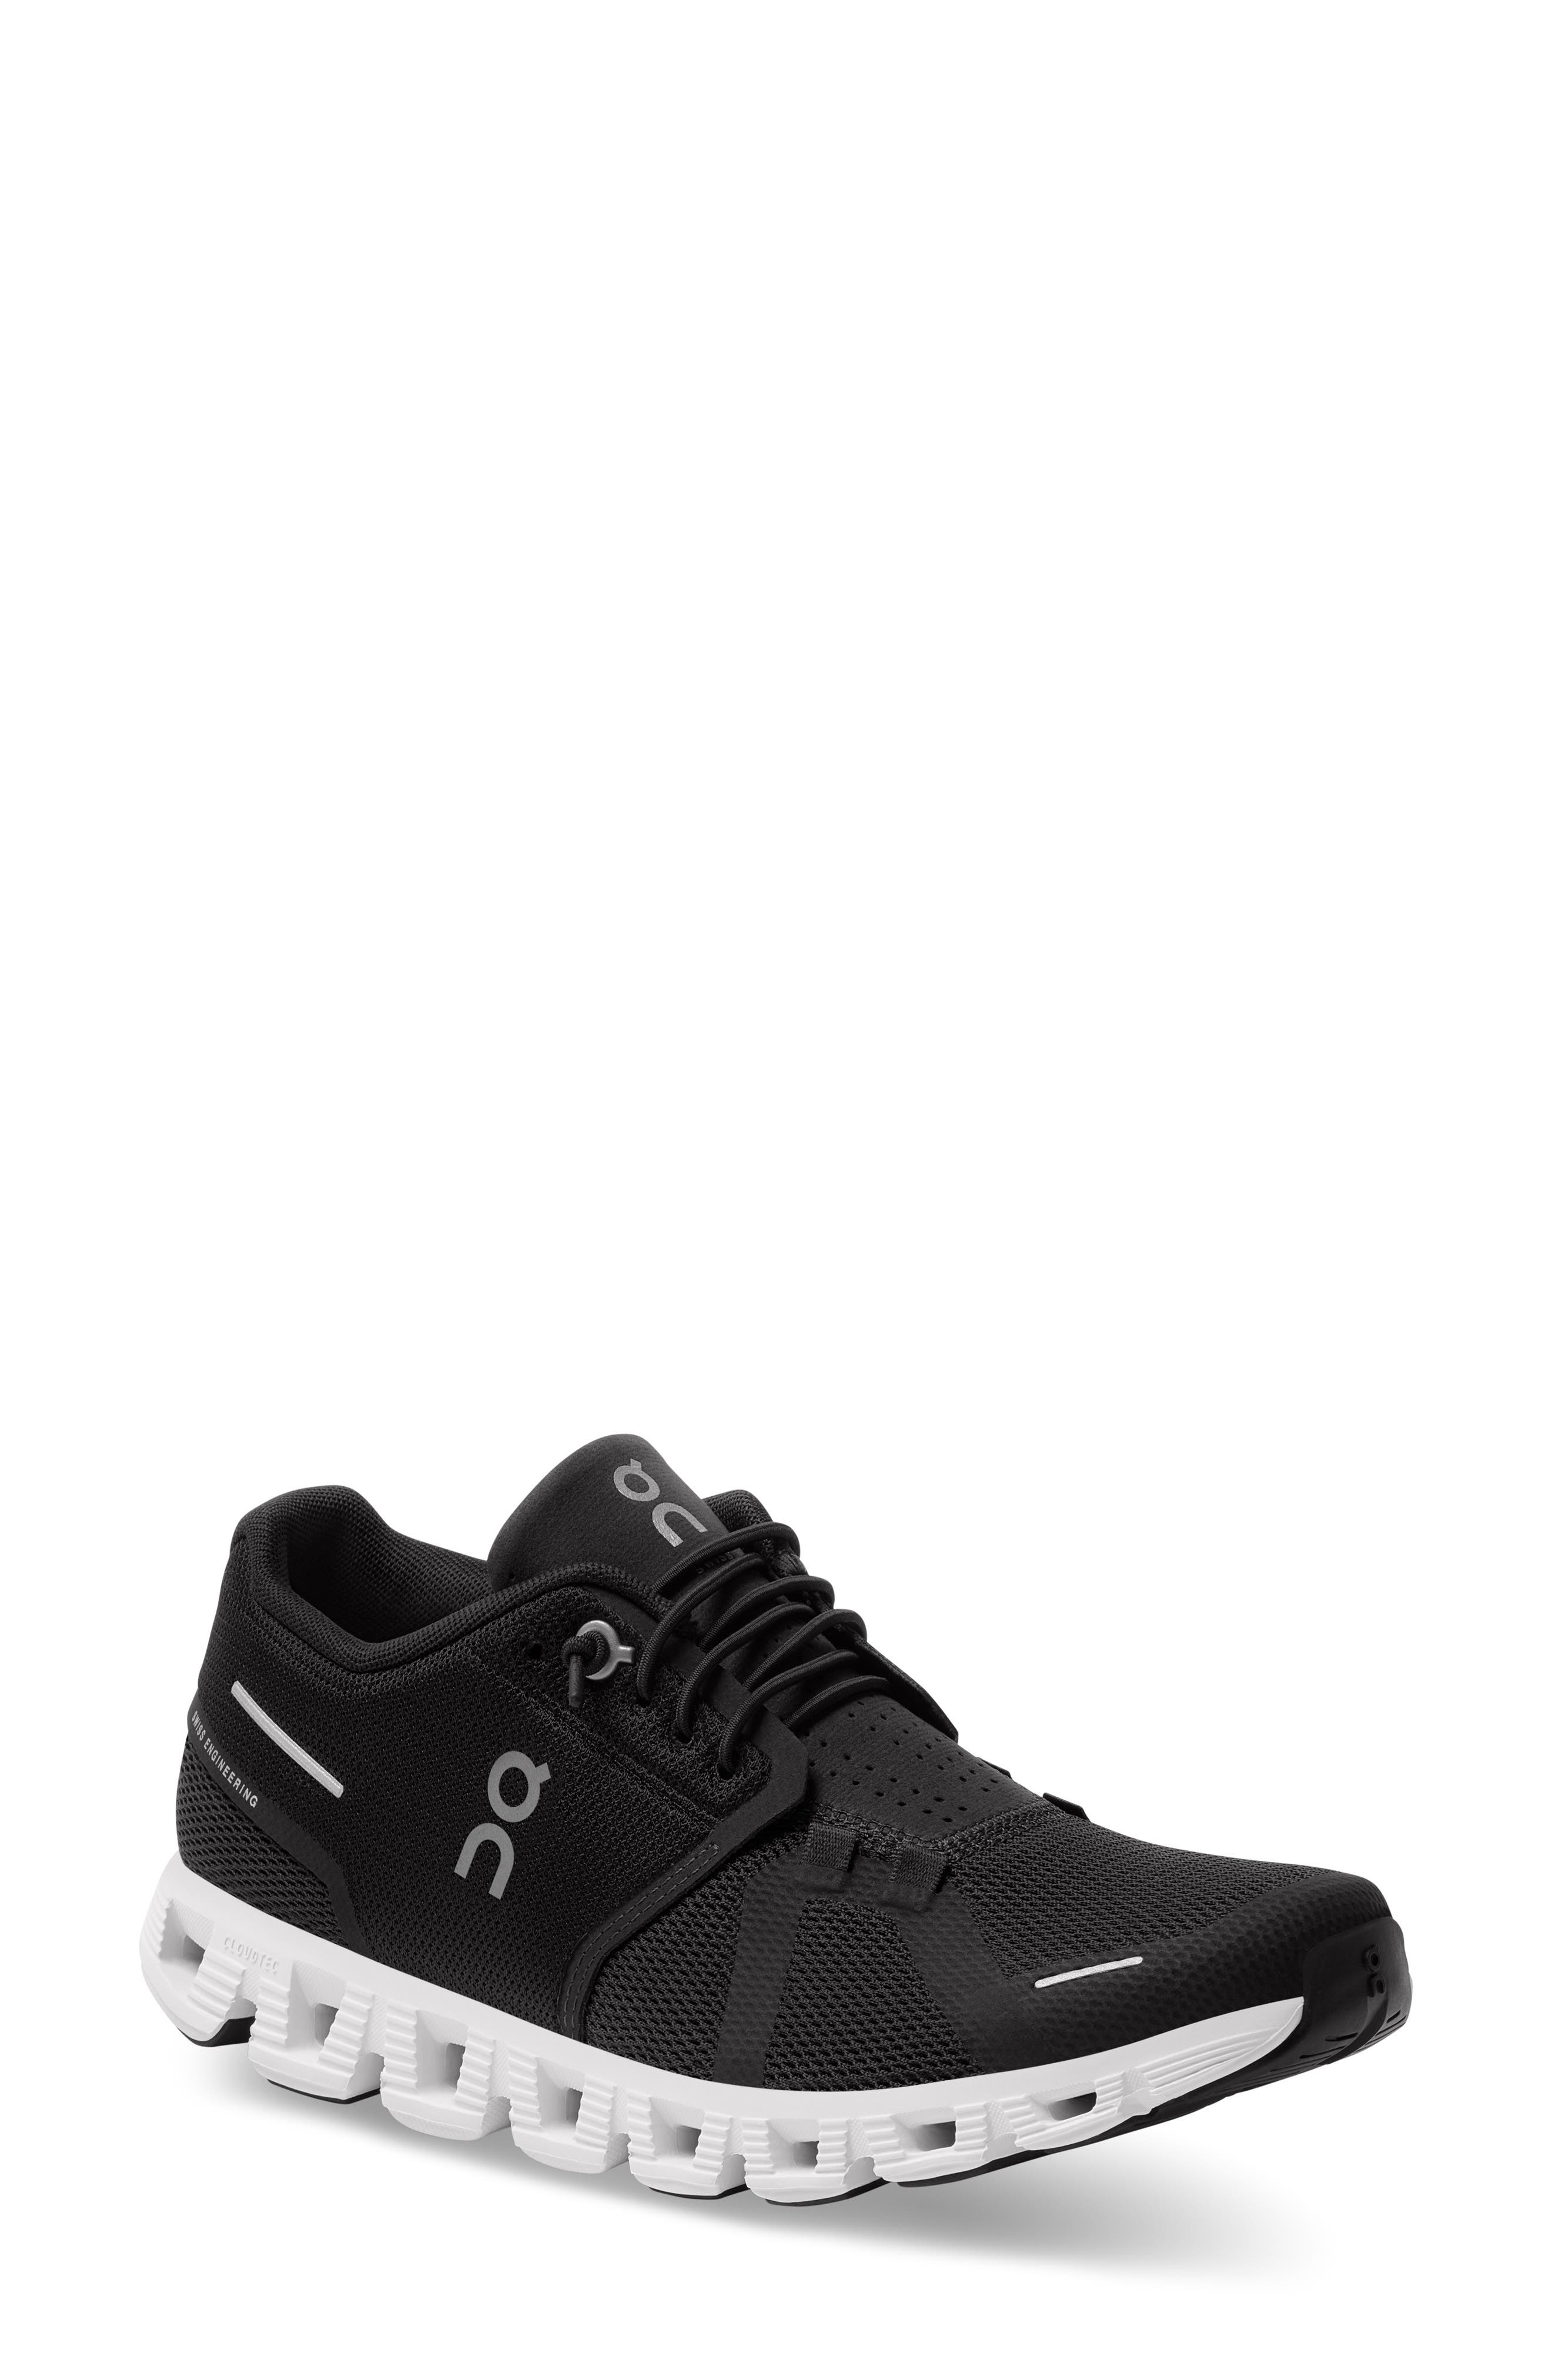 Shoes Womens Shoes Sneakers & Athletic Shoes Tie Sneakers Women's Low Top Black Sneakers 